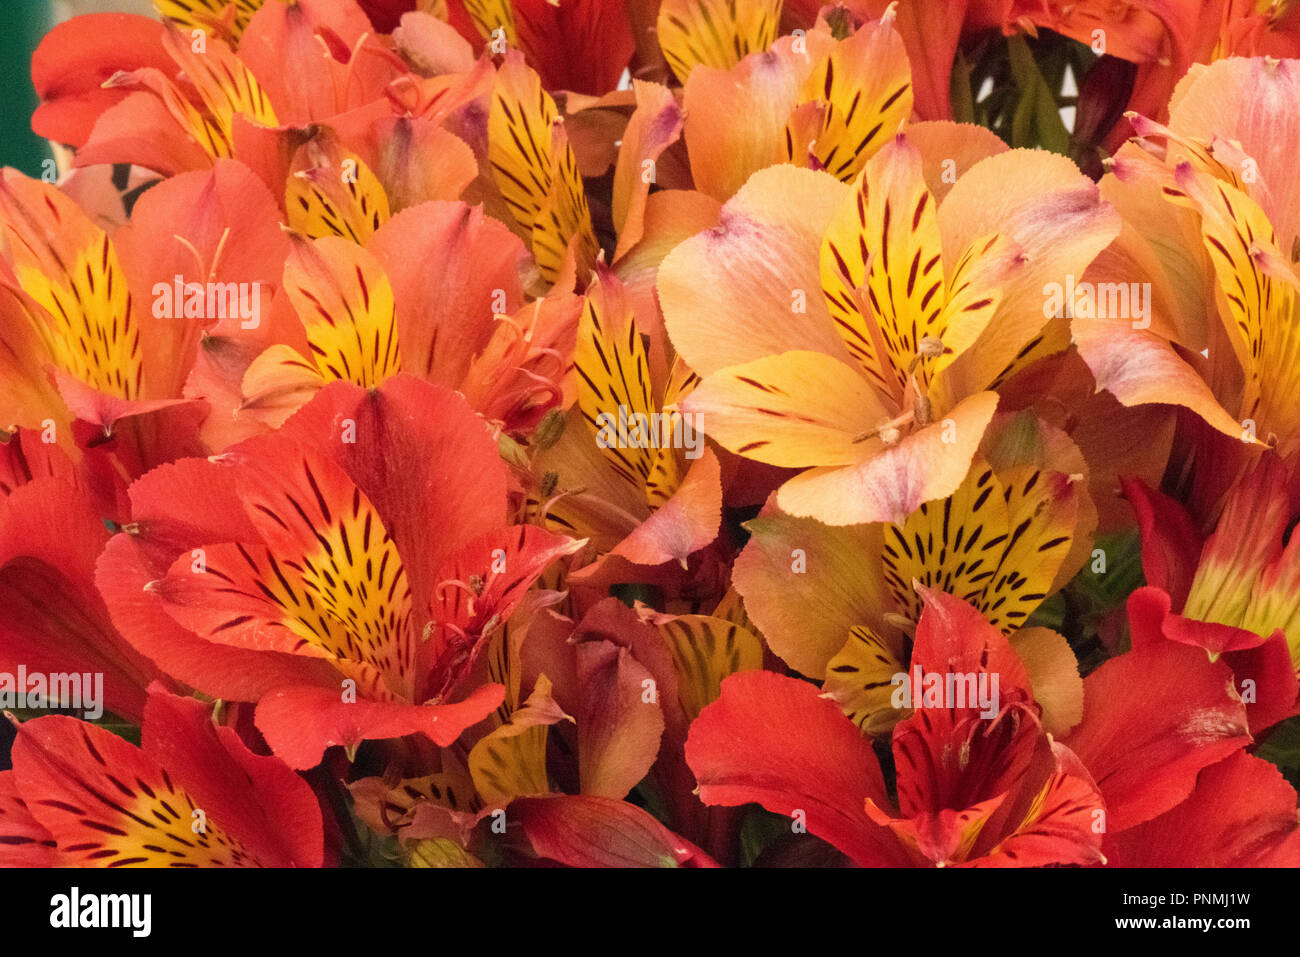 Peruvian lilies, lily of the Incas, Alstroemeria flowers, beautiful salmon and yellow petals Stock Photo